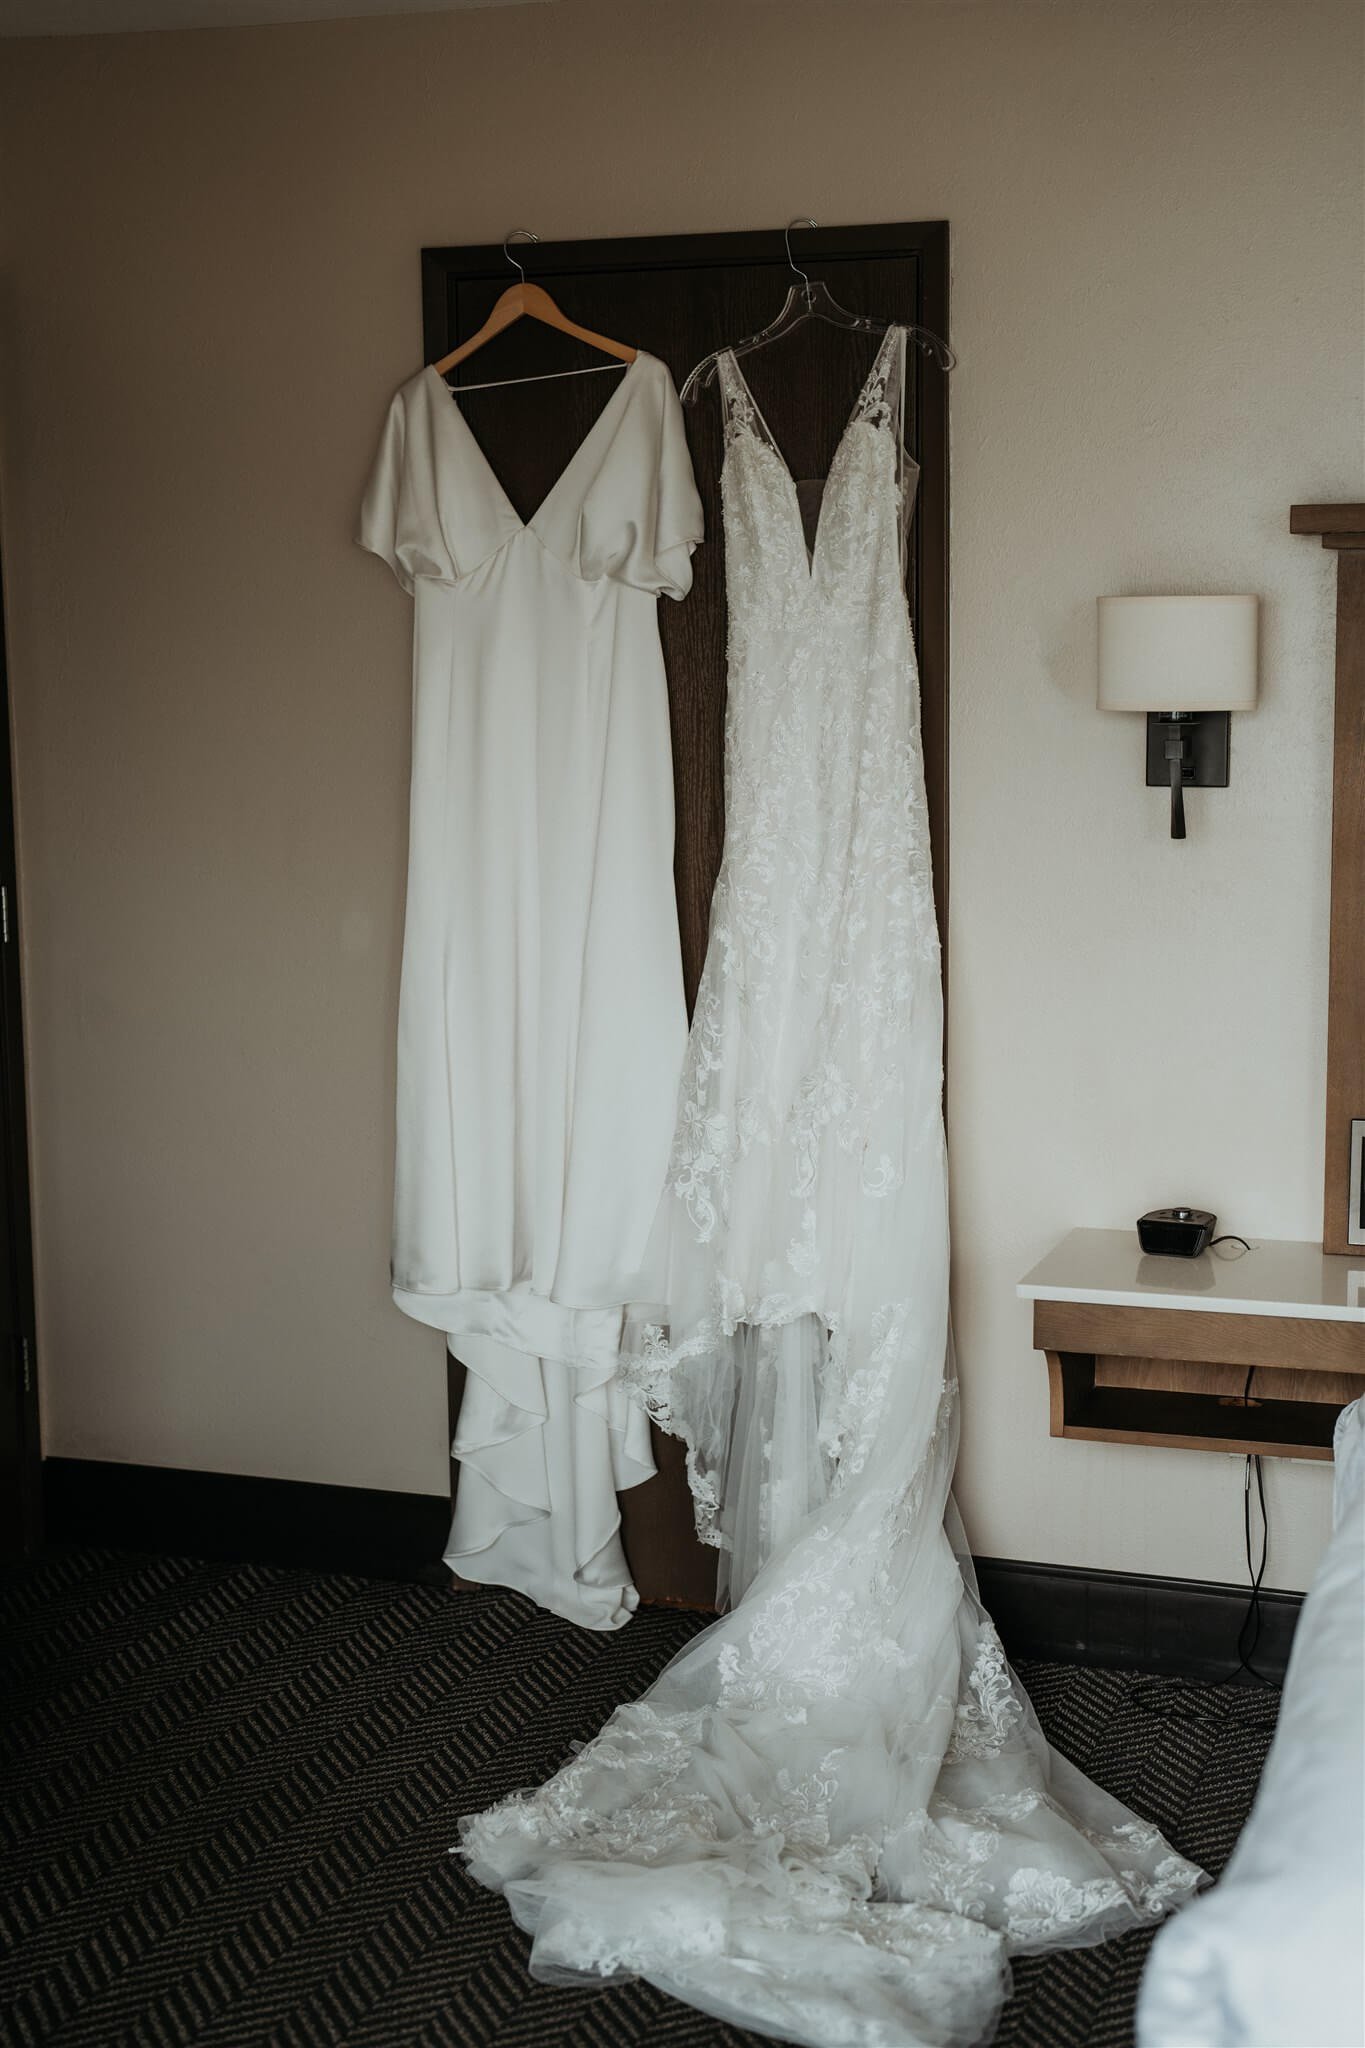 two brides wedding dresses hanging side by side